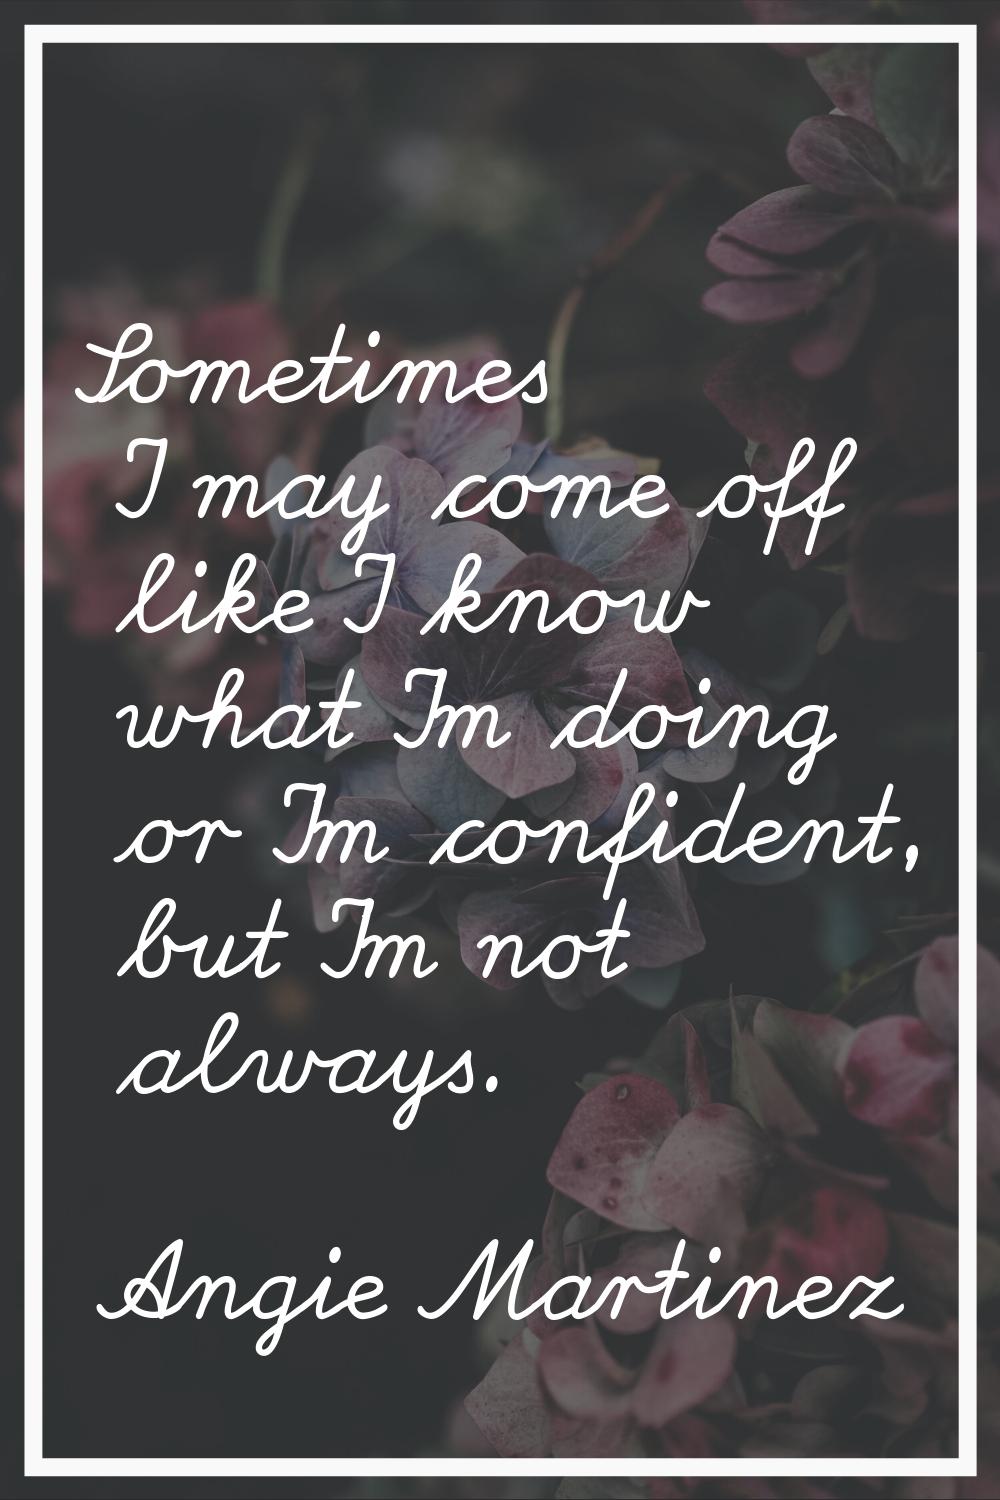 Sometimes I may come off like I know what I'm doing or I'm confident, but I'm not always.